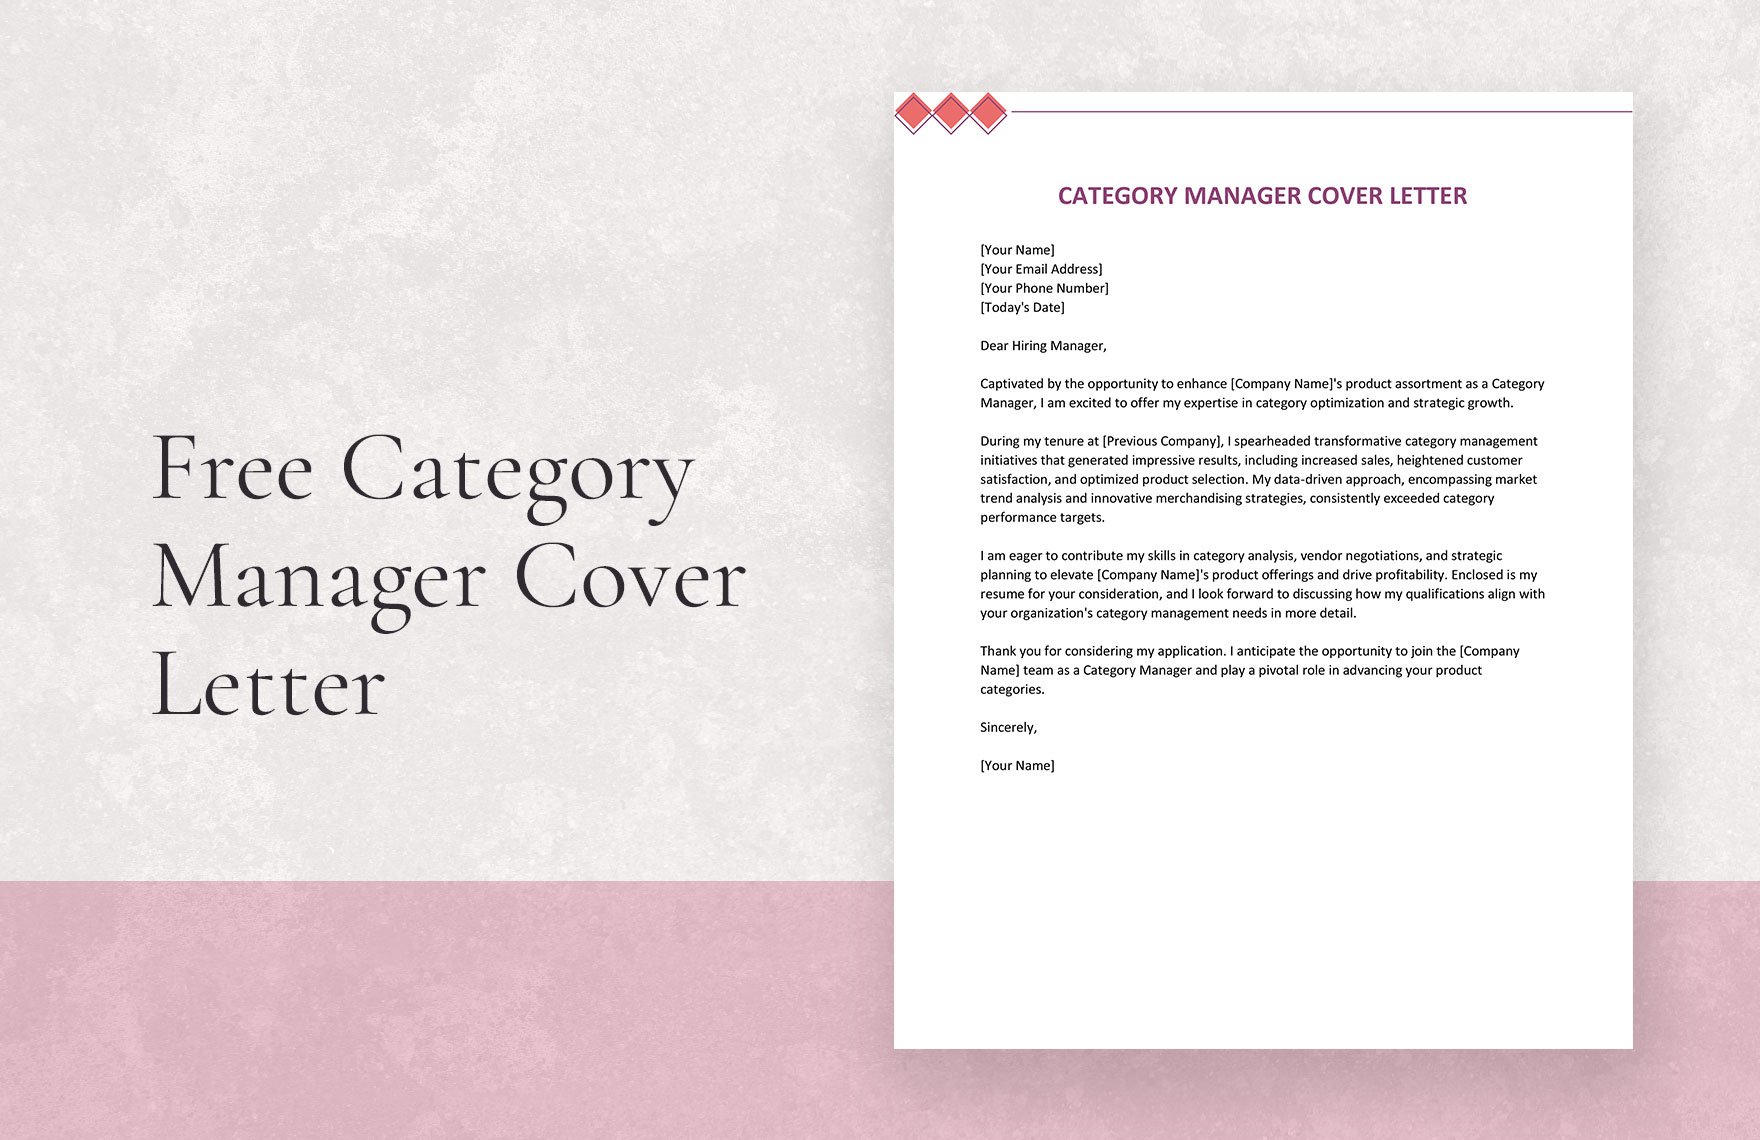 Category Manager Cover Letter